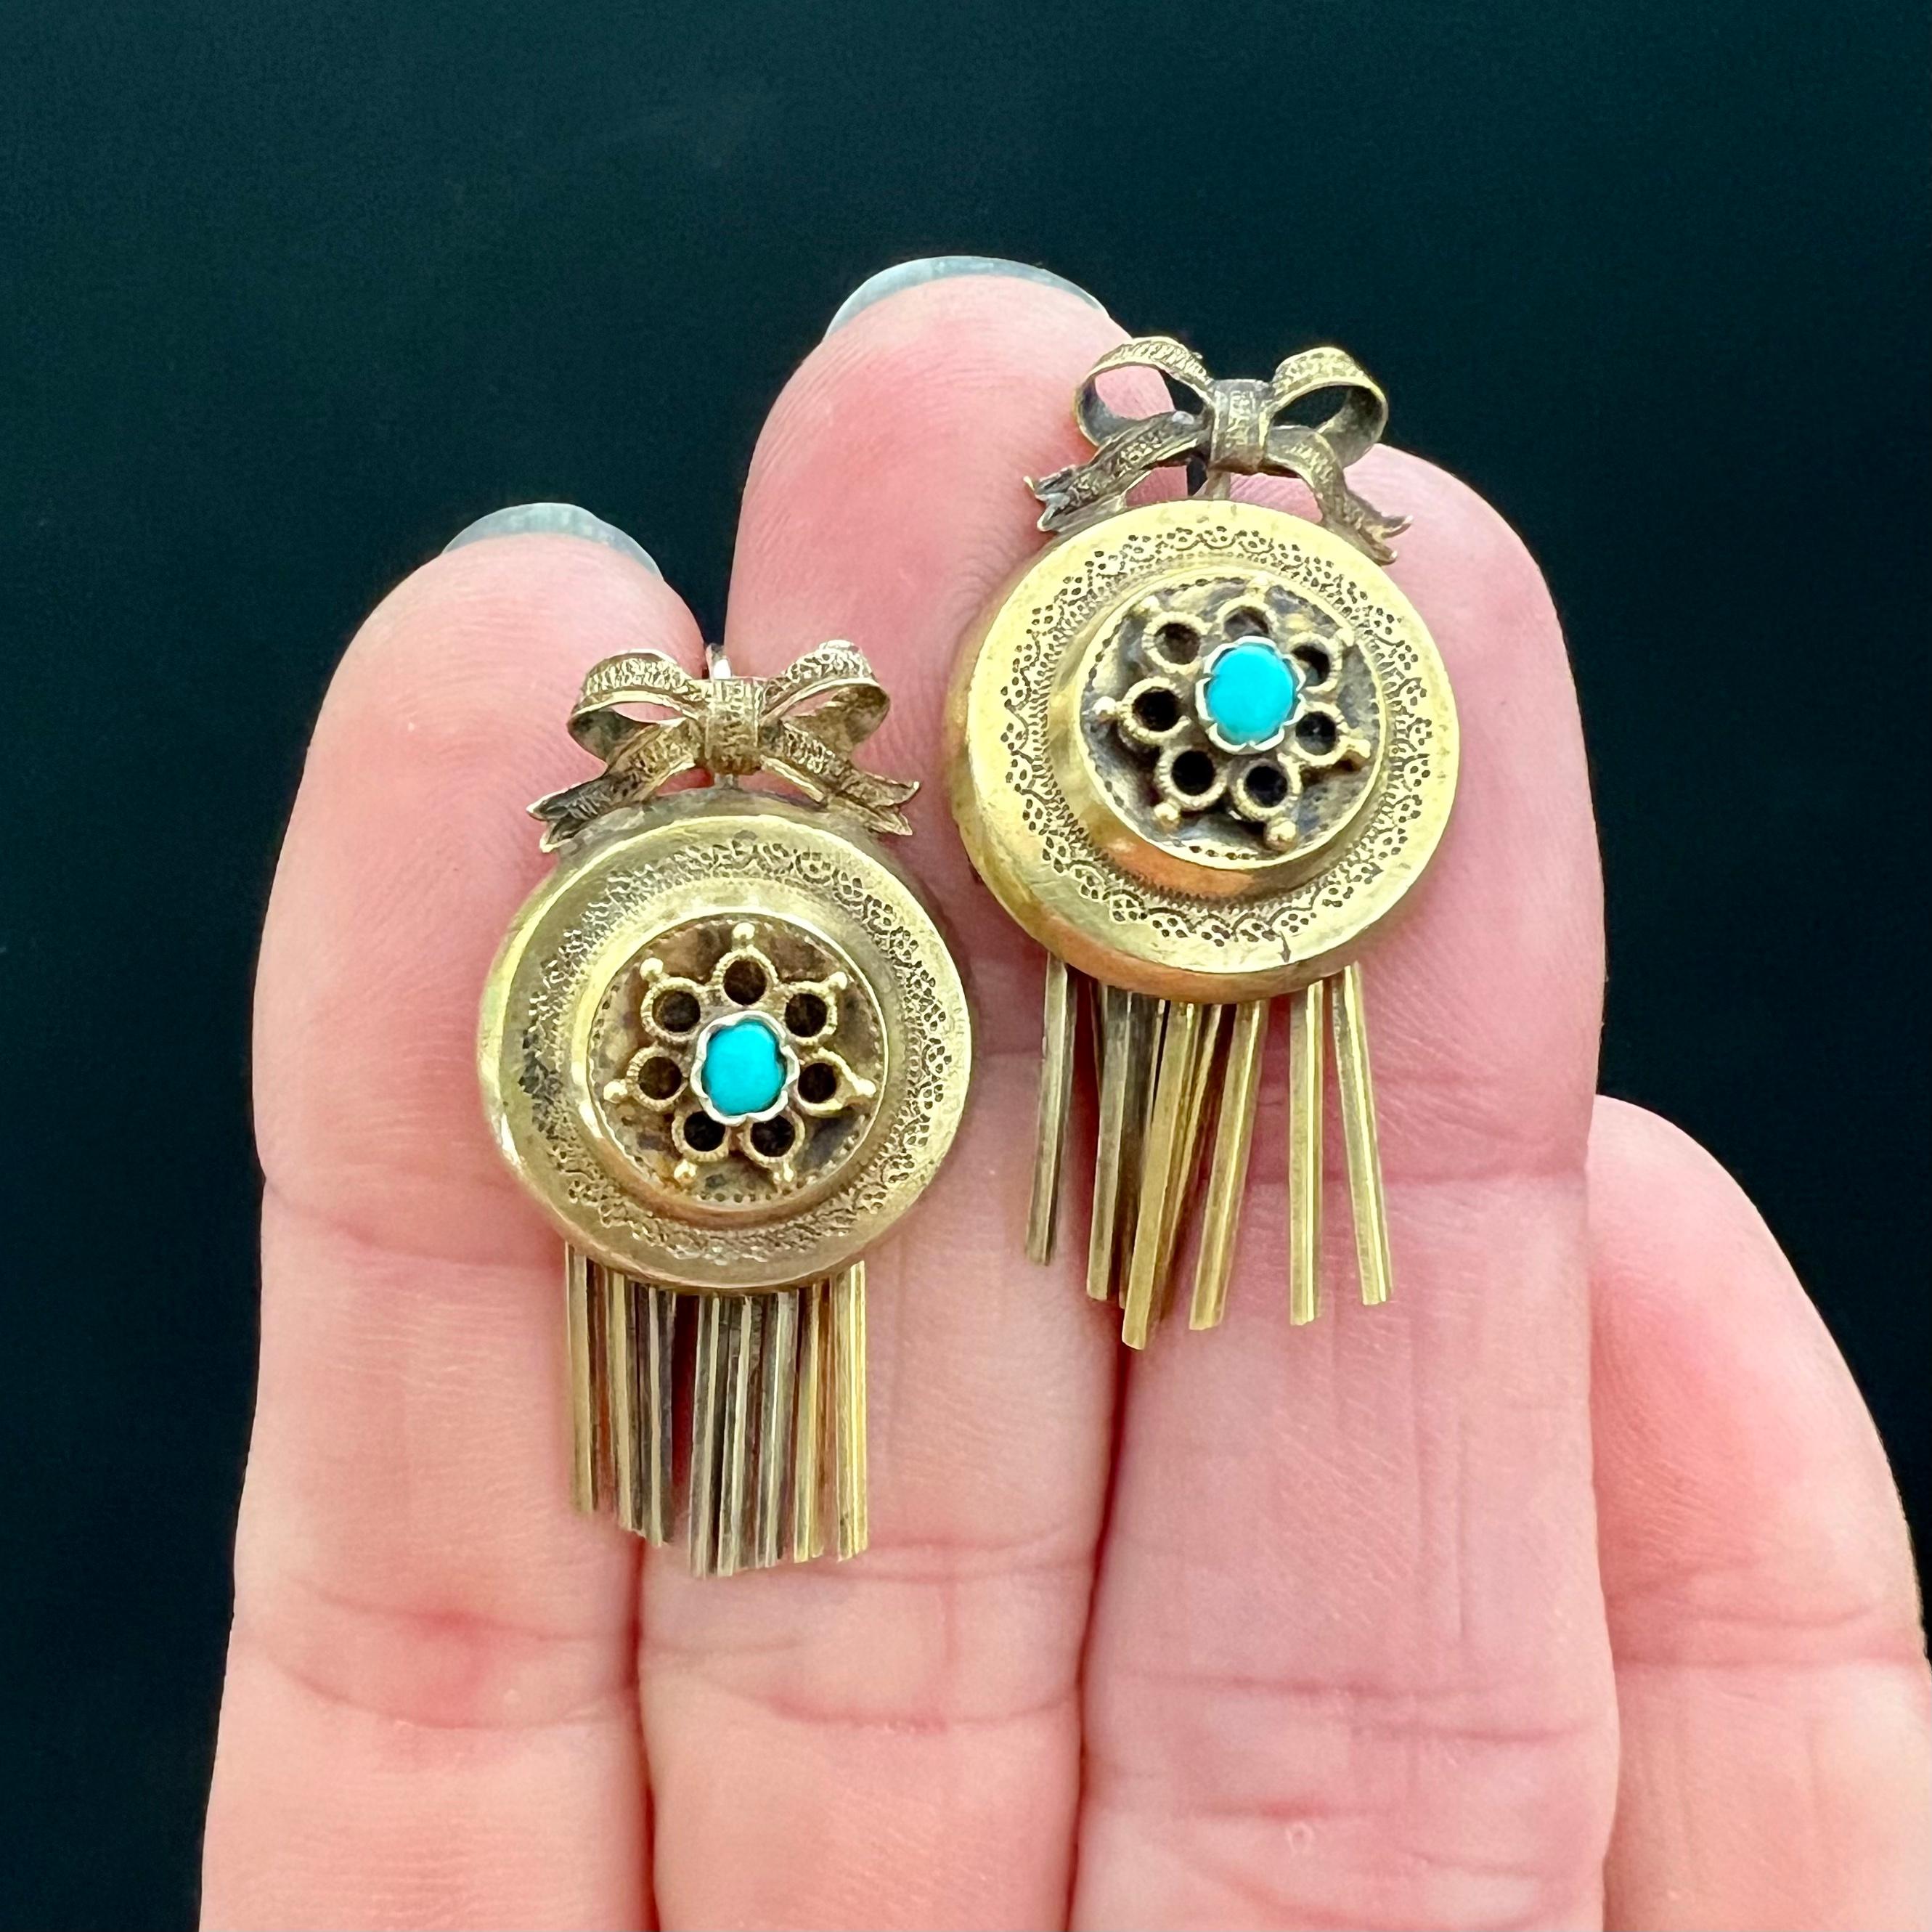 These antique Victorian earrings are perfectly accented with delicate engraved work, bright blue turquoise, and playfully dangling flat bars at the bottom.  

A beautiful bow frame adorns these earrings at the top and at the base of each earring are